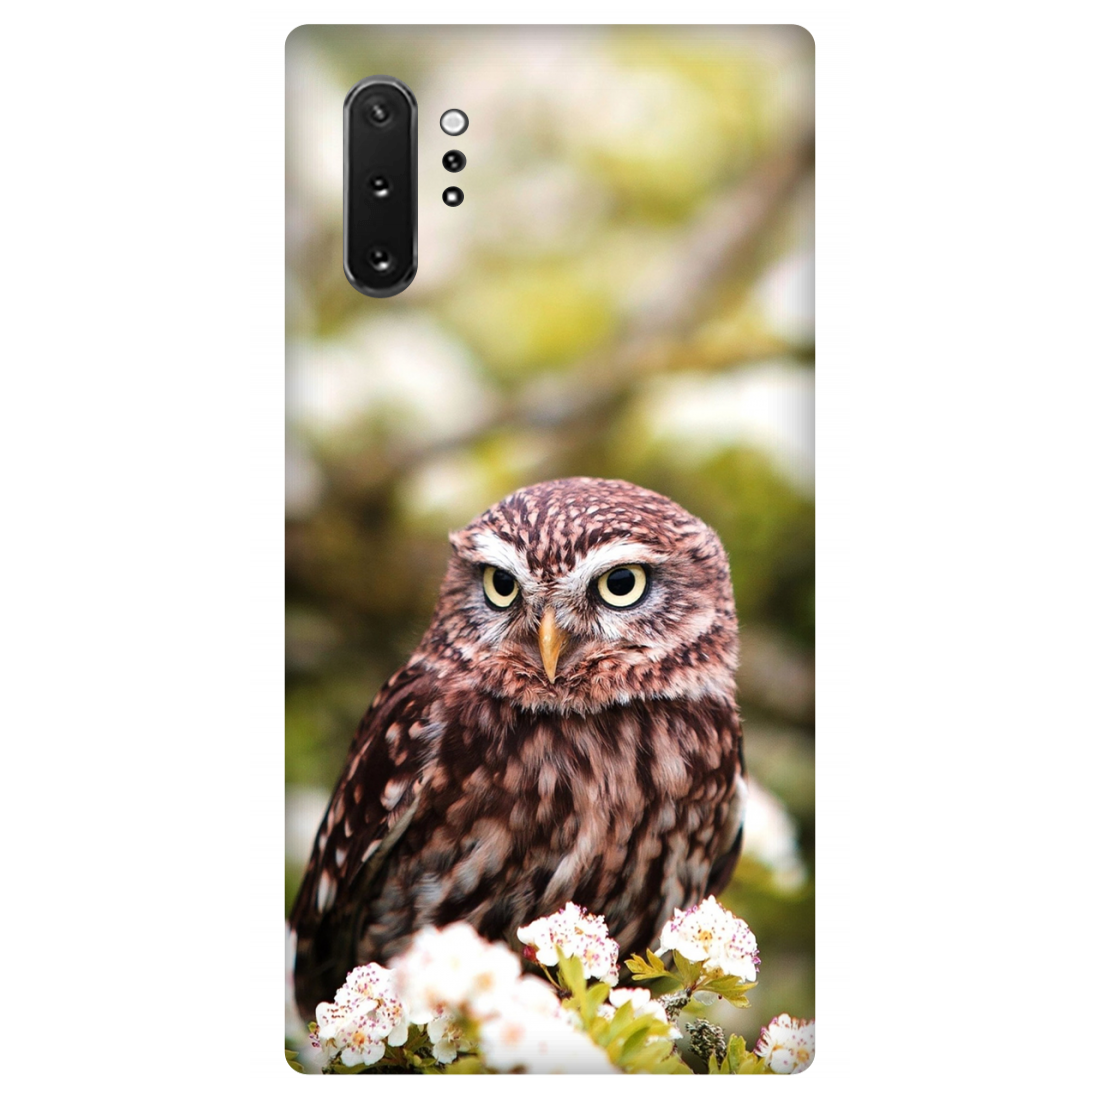 Owl Amidst Blossoms Case Samsung Galaxy Note 10 Plus